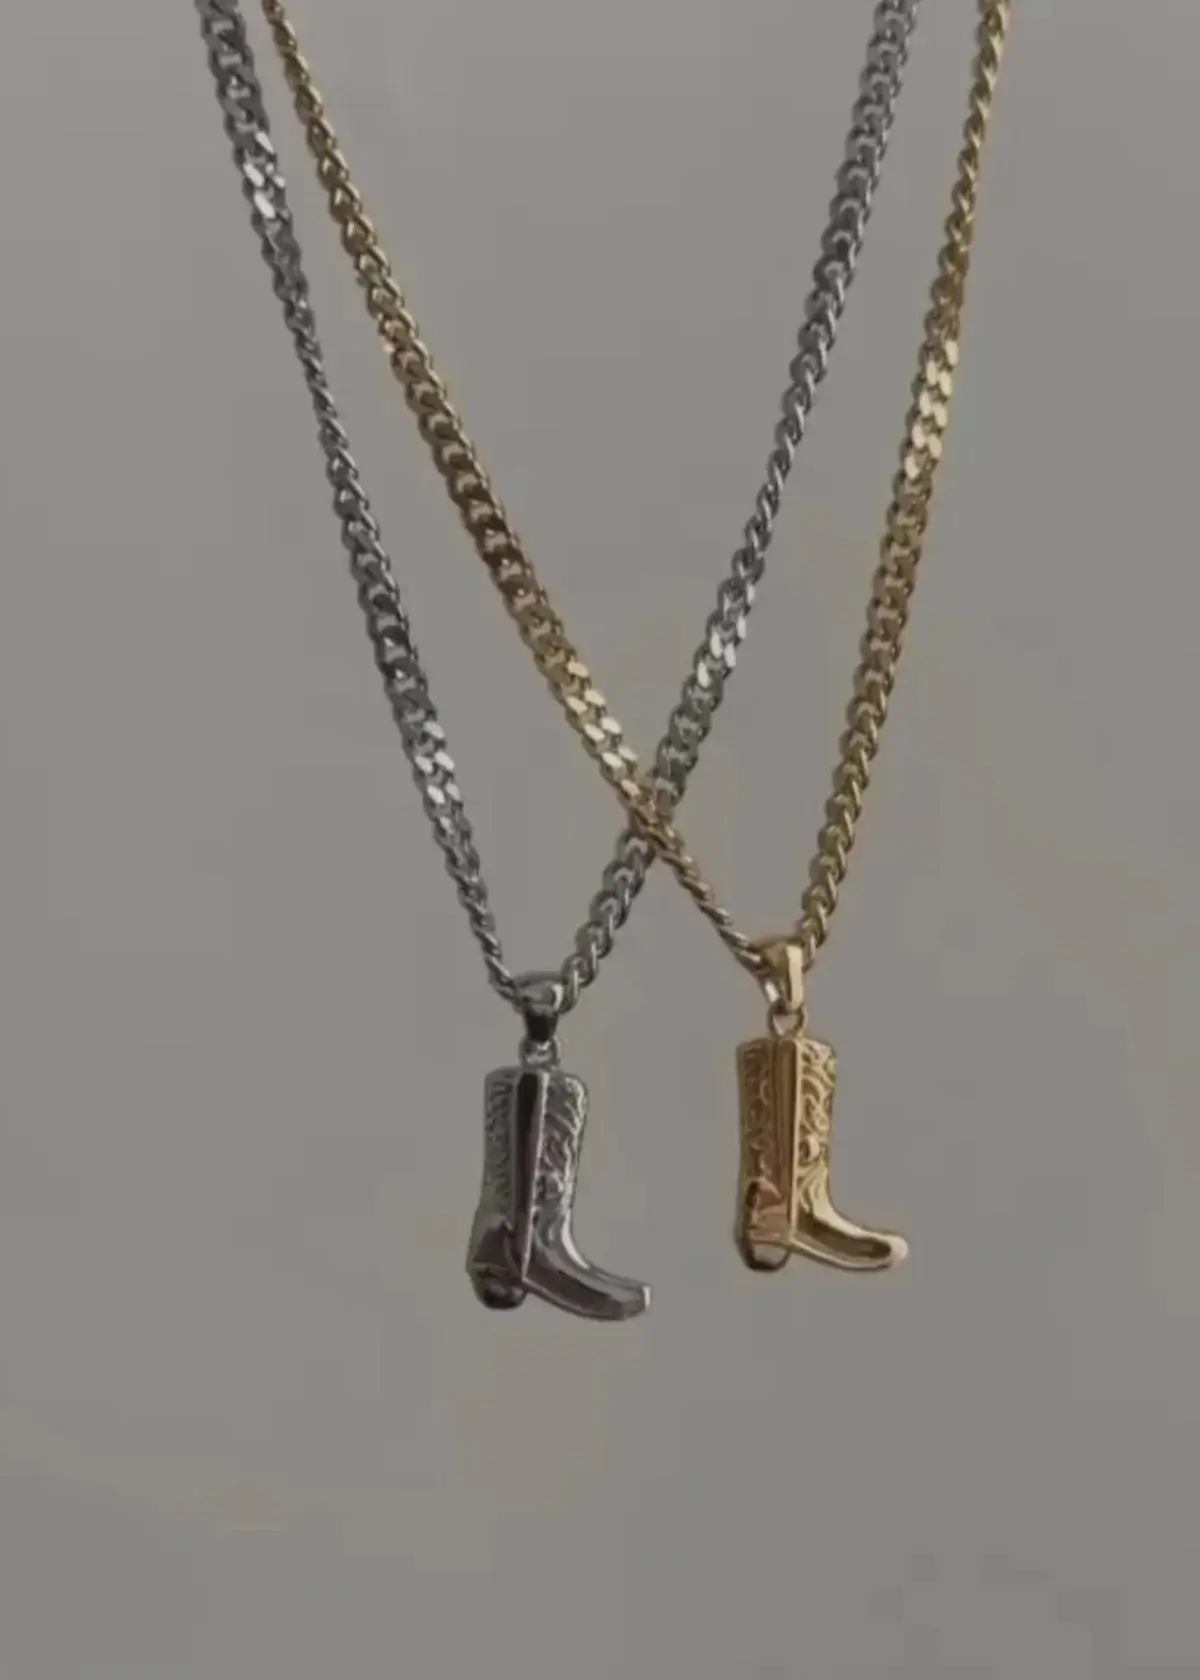 How to choose the right Cowboy Boot Necklace?